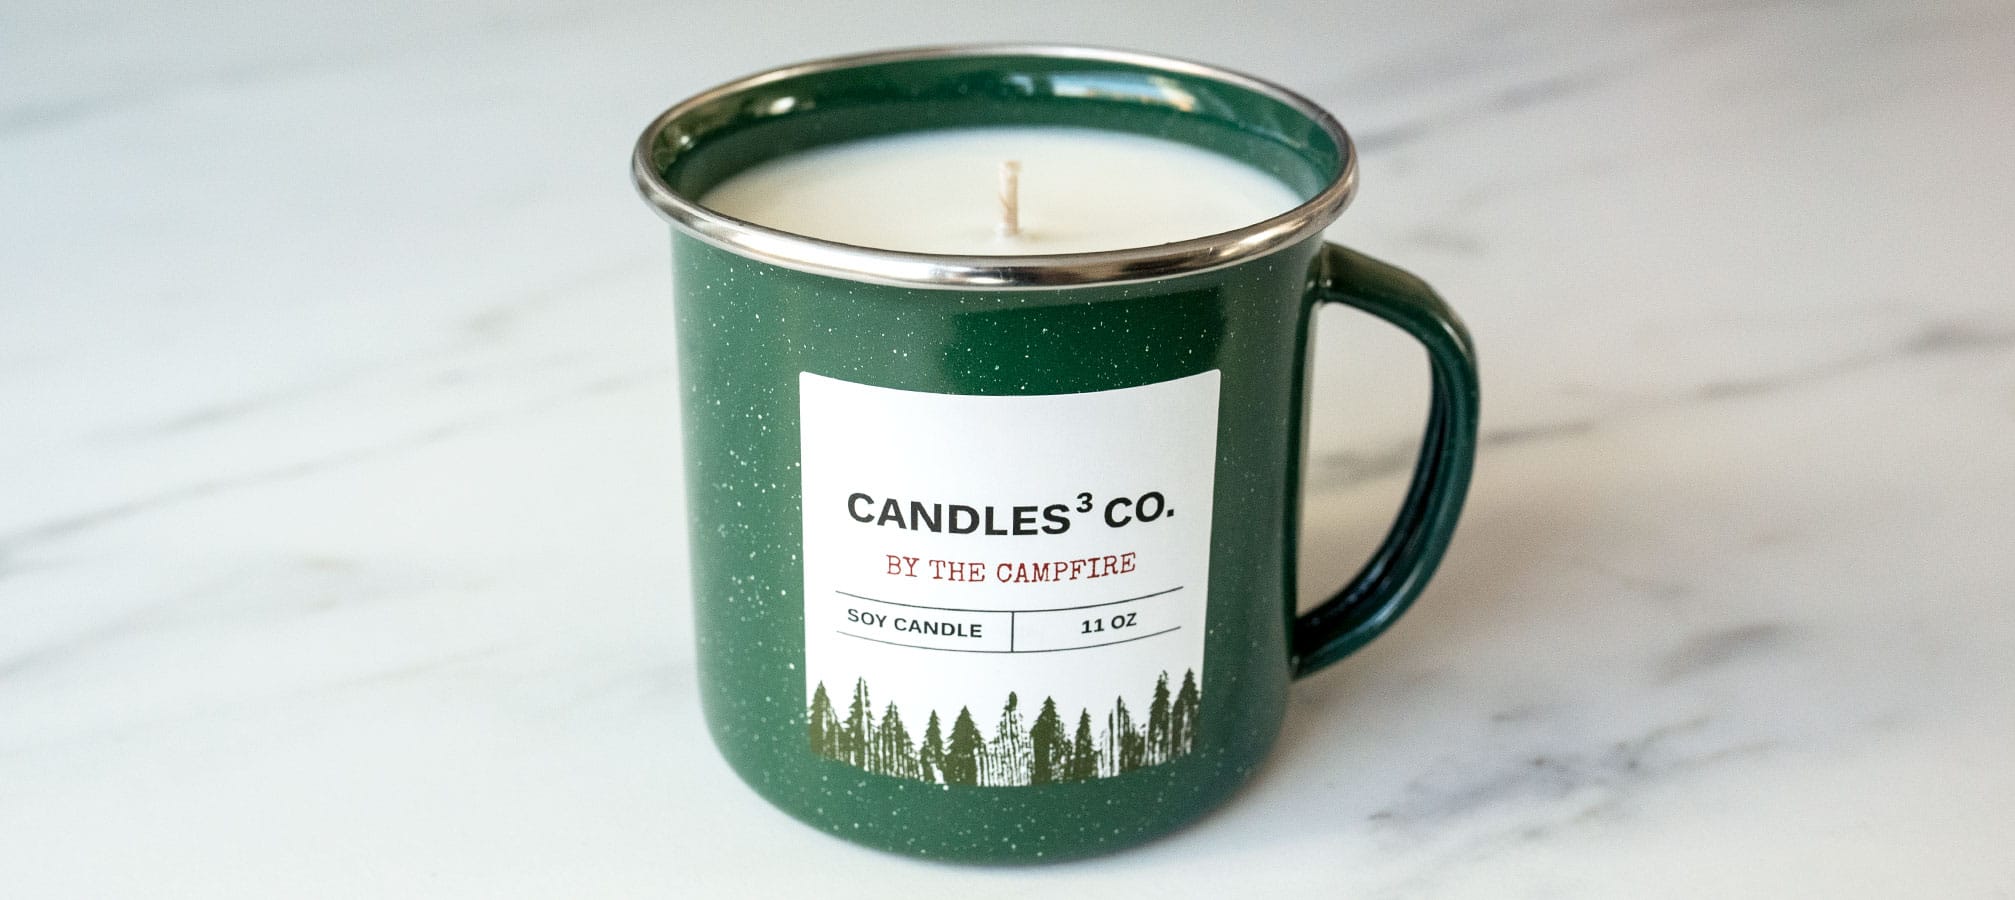 Close up of a green enamel mug candle with a label.